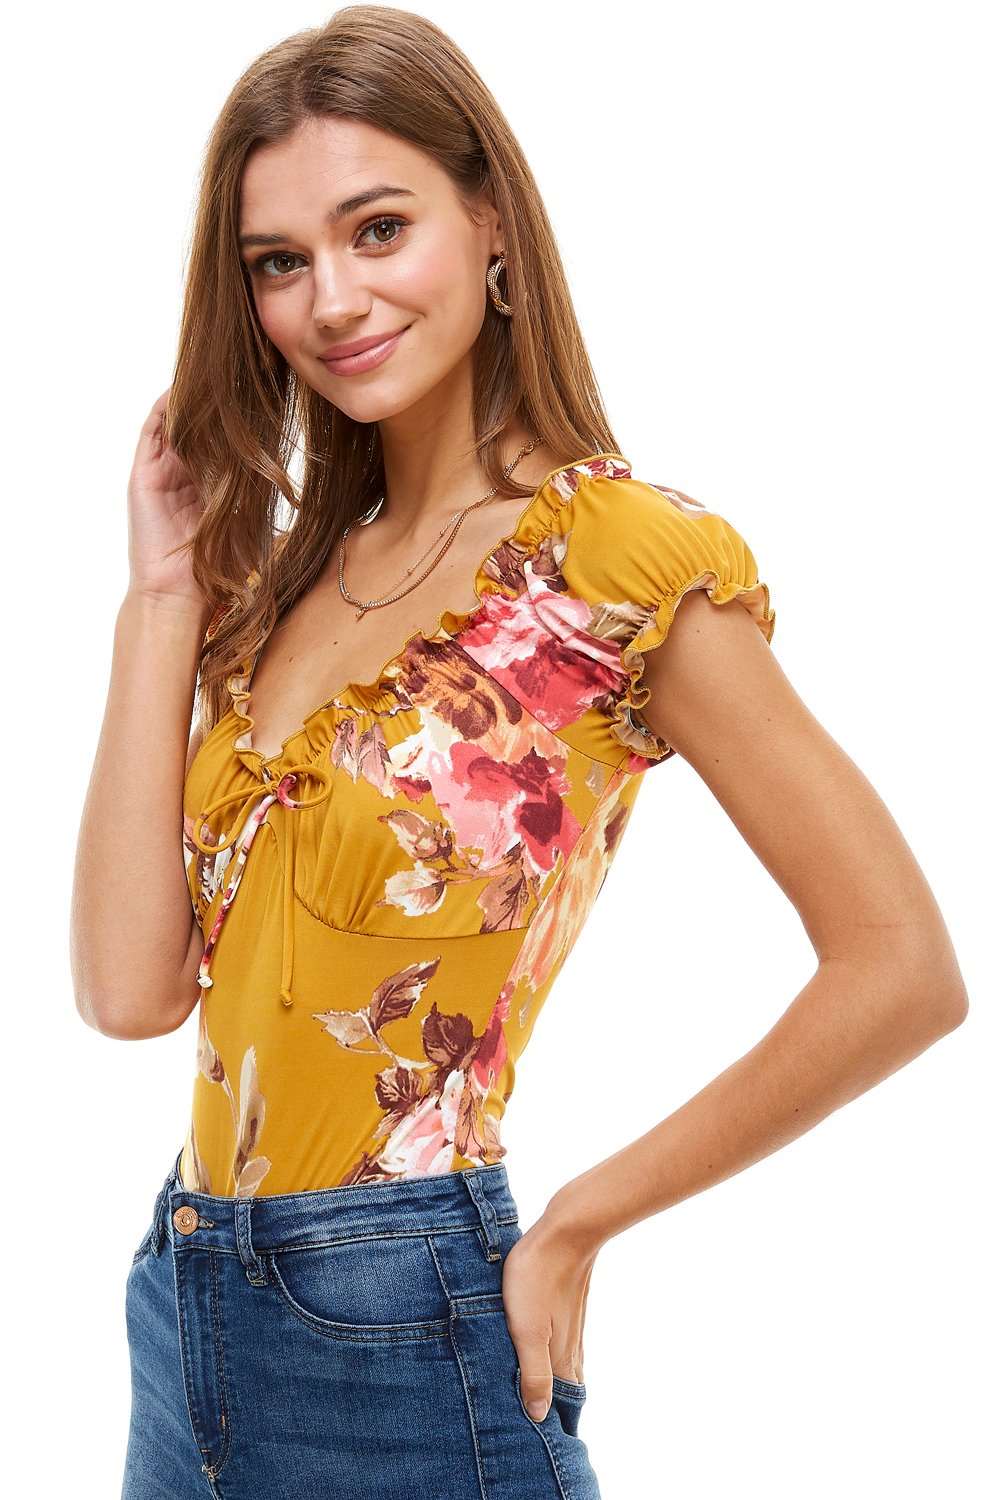 Nfin8 Blossom Chic Floral Printed Bodysuit